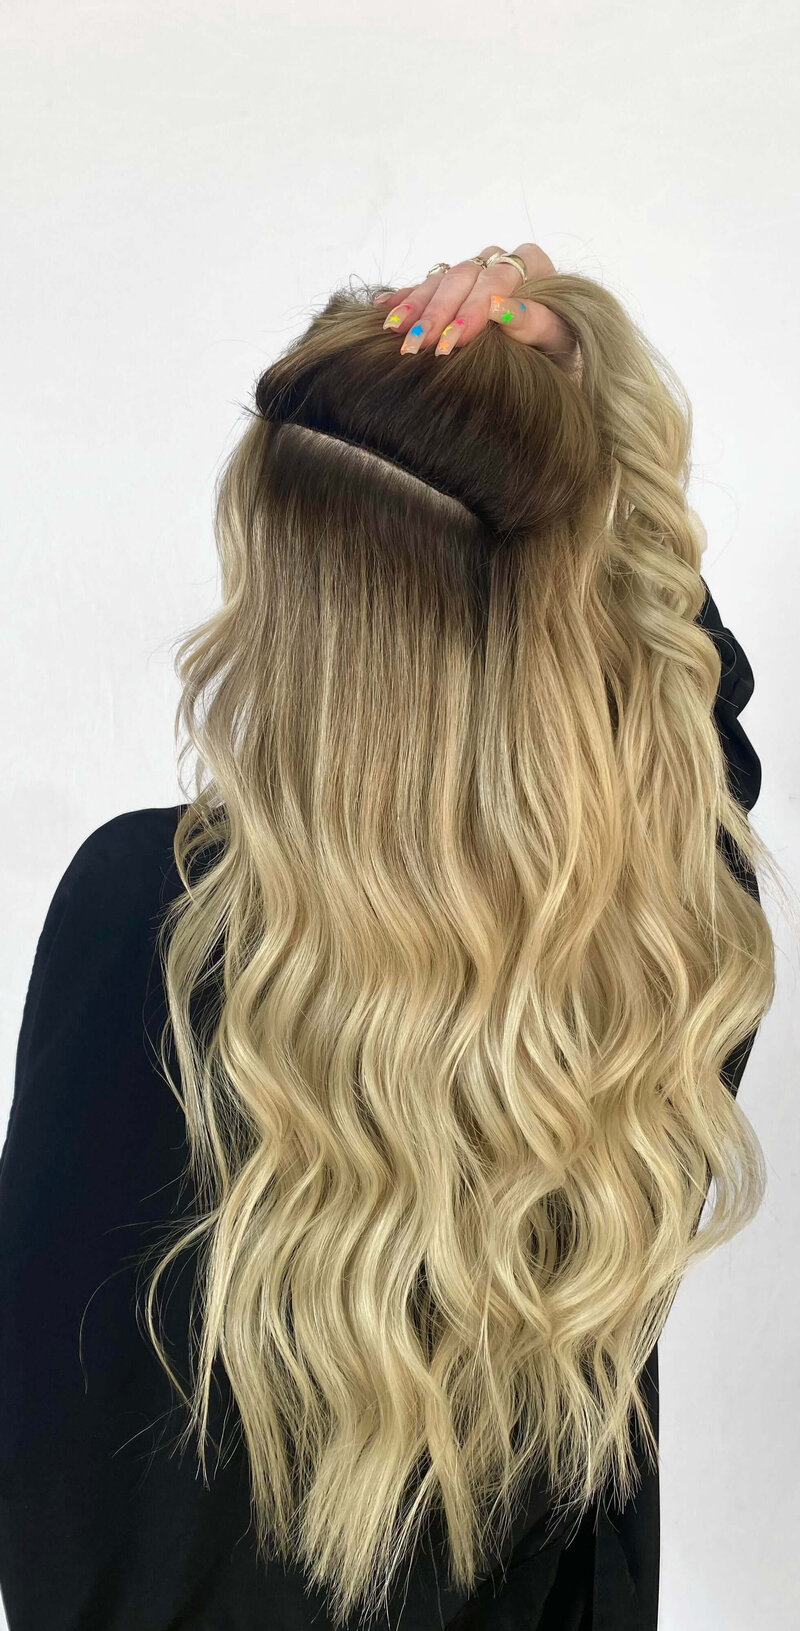 Back of woman's head showcasing blond blended hair extensions using IBE® method